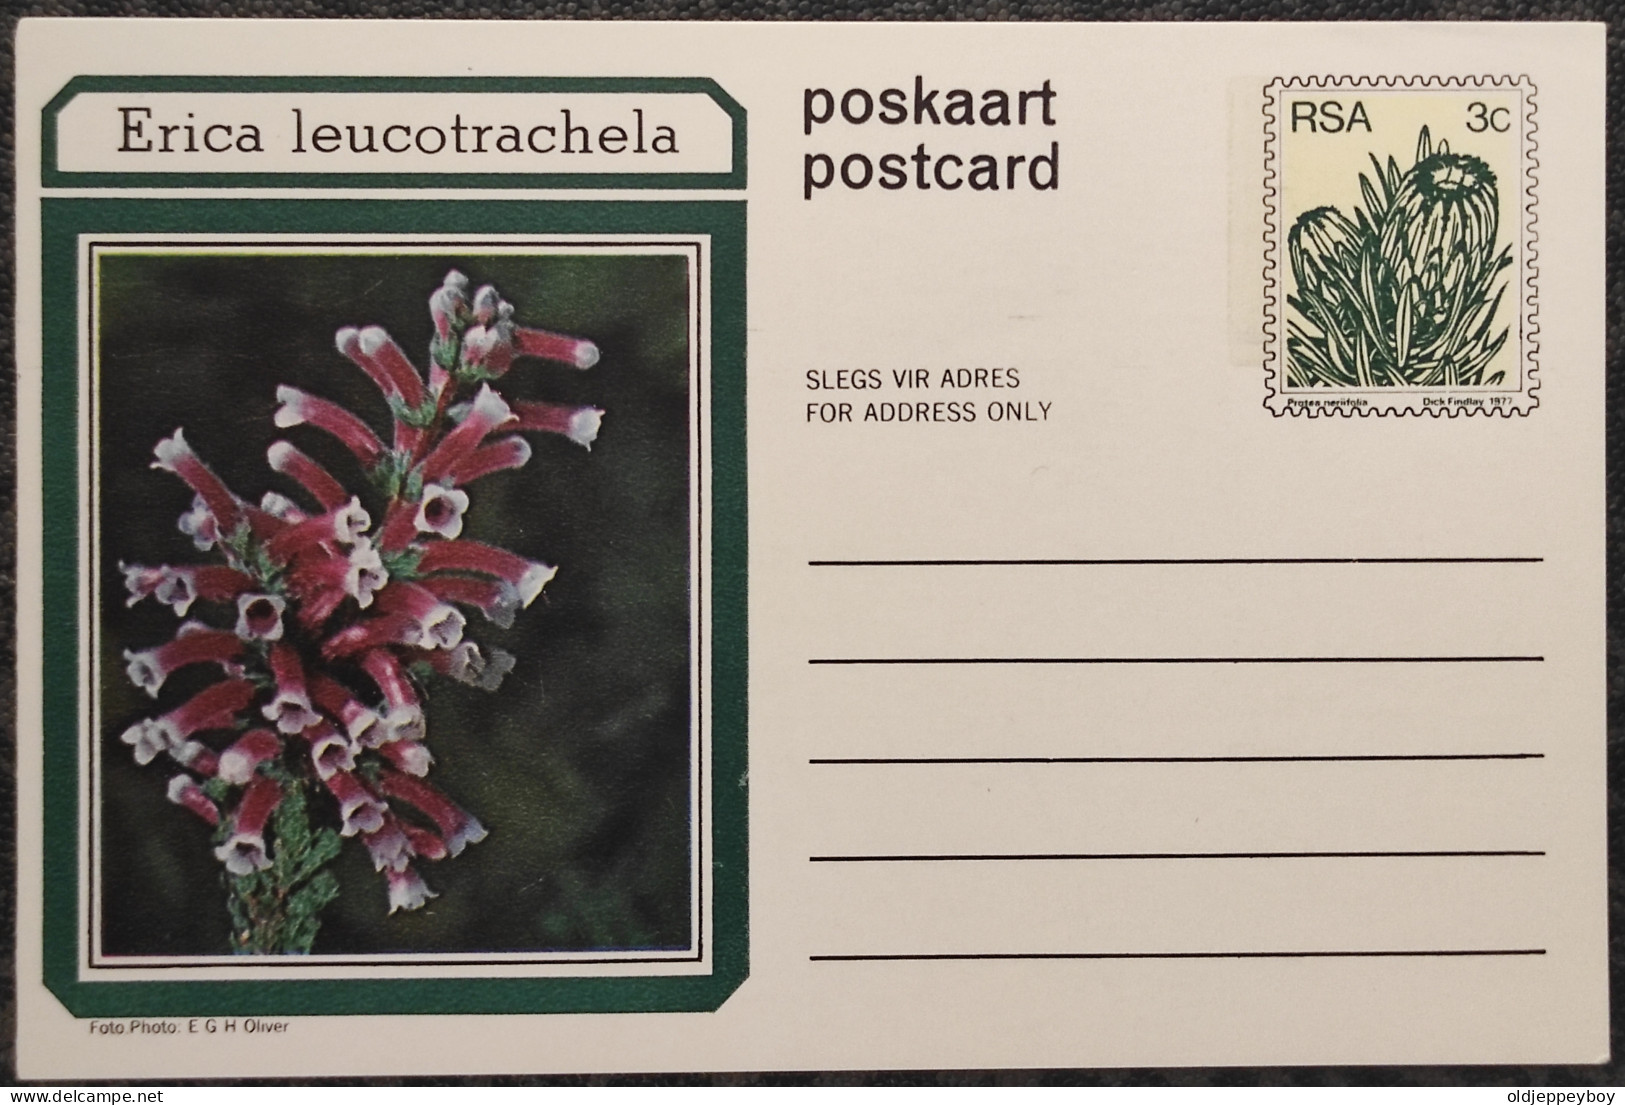 3c SOUTH AFRICA Postal STATIONERY CARD Illus ERICA Leucotrachela FLOWER Cover Stamps Flowers Rsa - Lettres & Documents